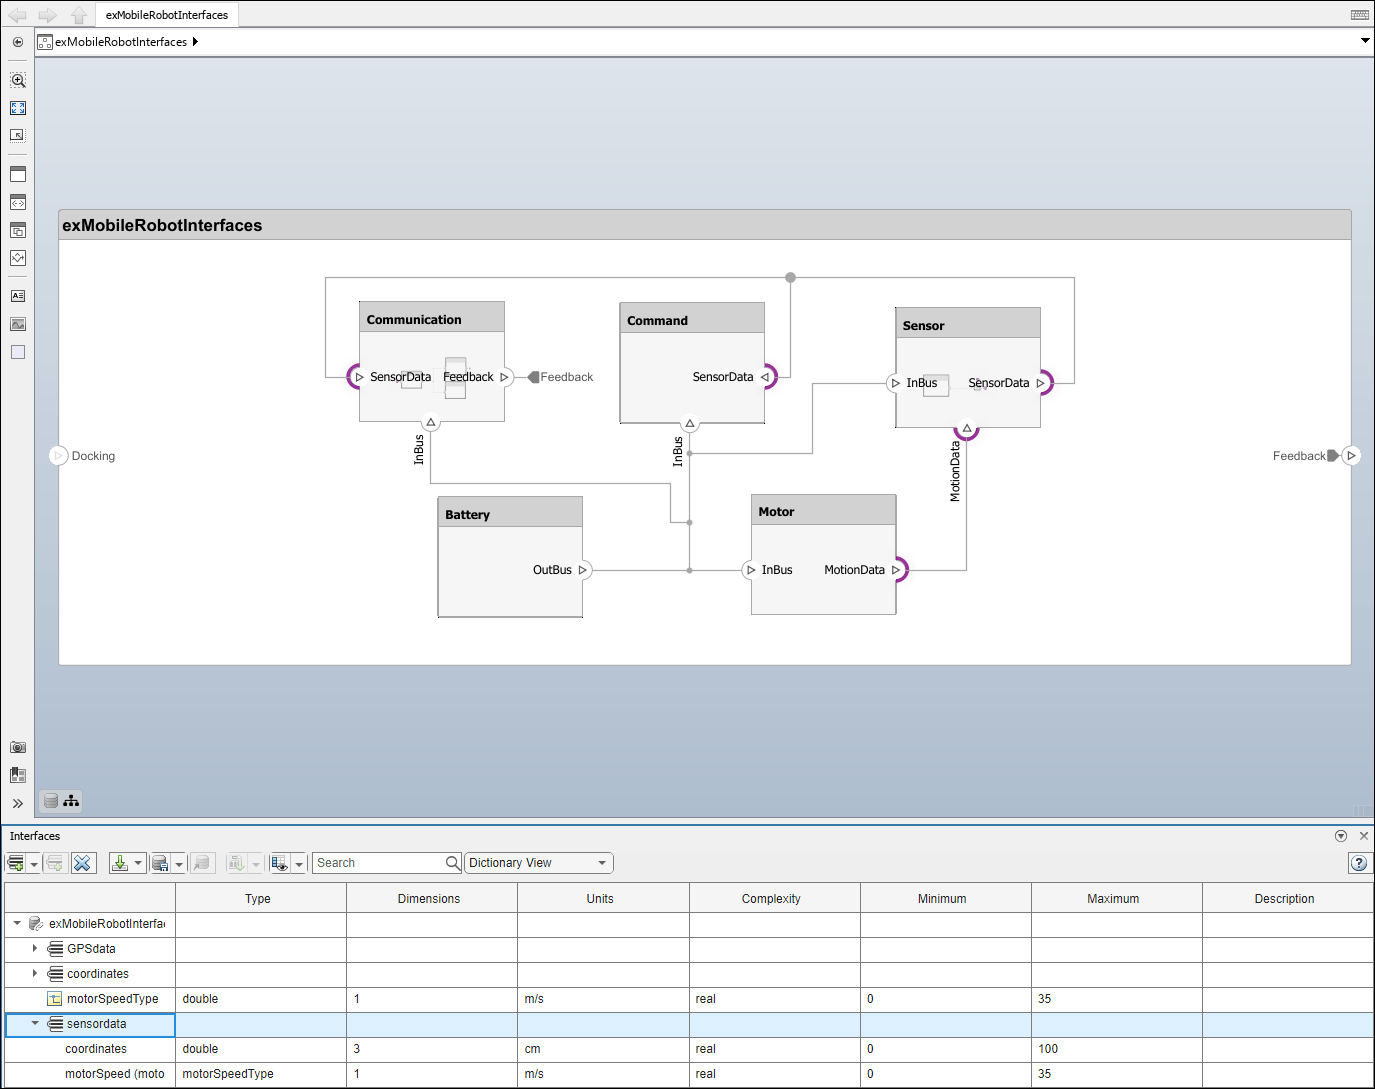 The interface named 'sensor data' is selected in the Interface Editor. The ports that are associated with it are highlighted in purple in the model.